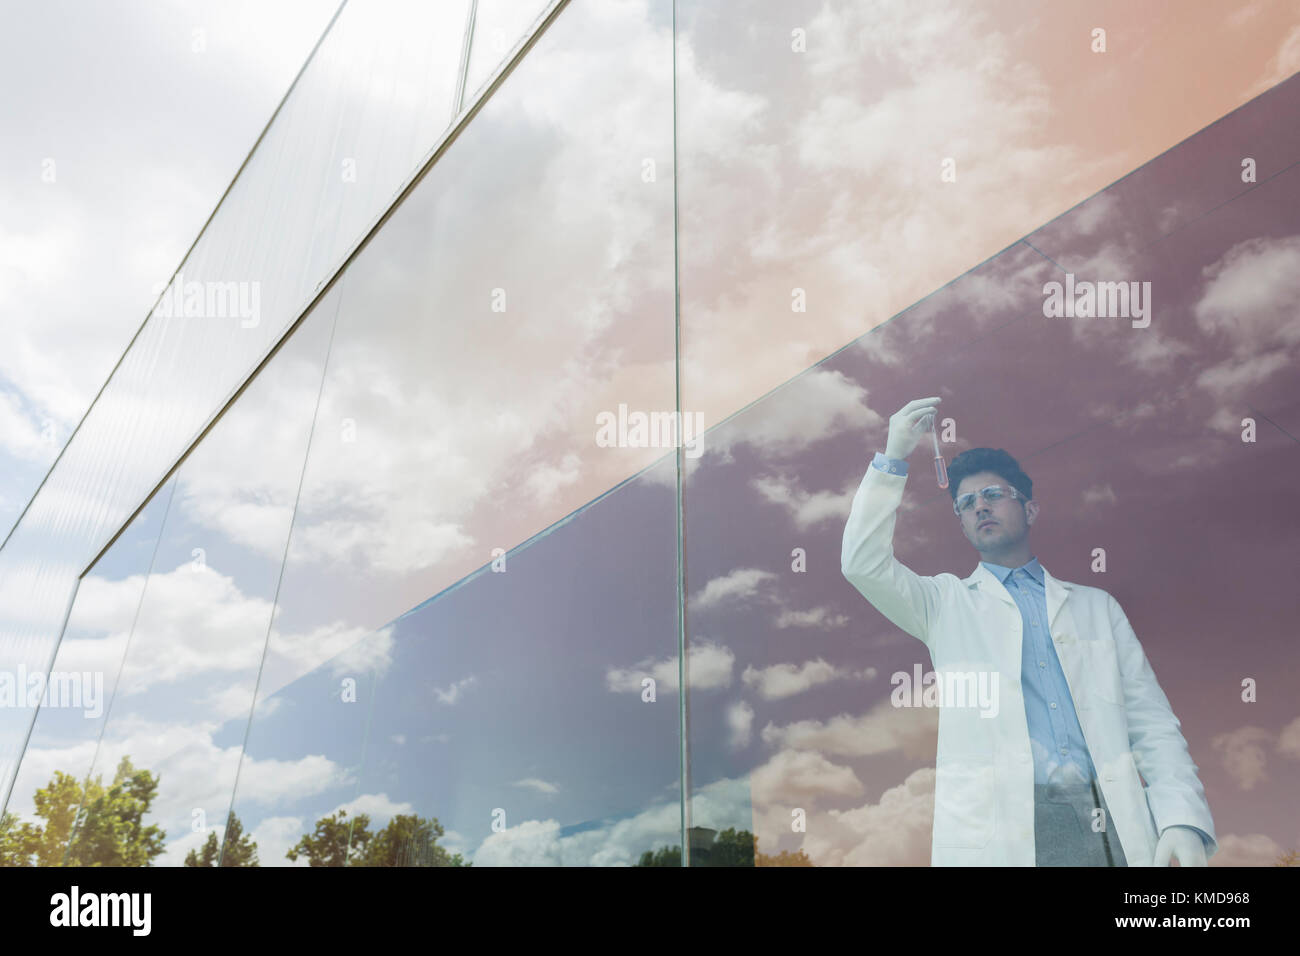 Scientist examining liquid in beaker at modern window with cloud reflections Stock Photo